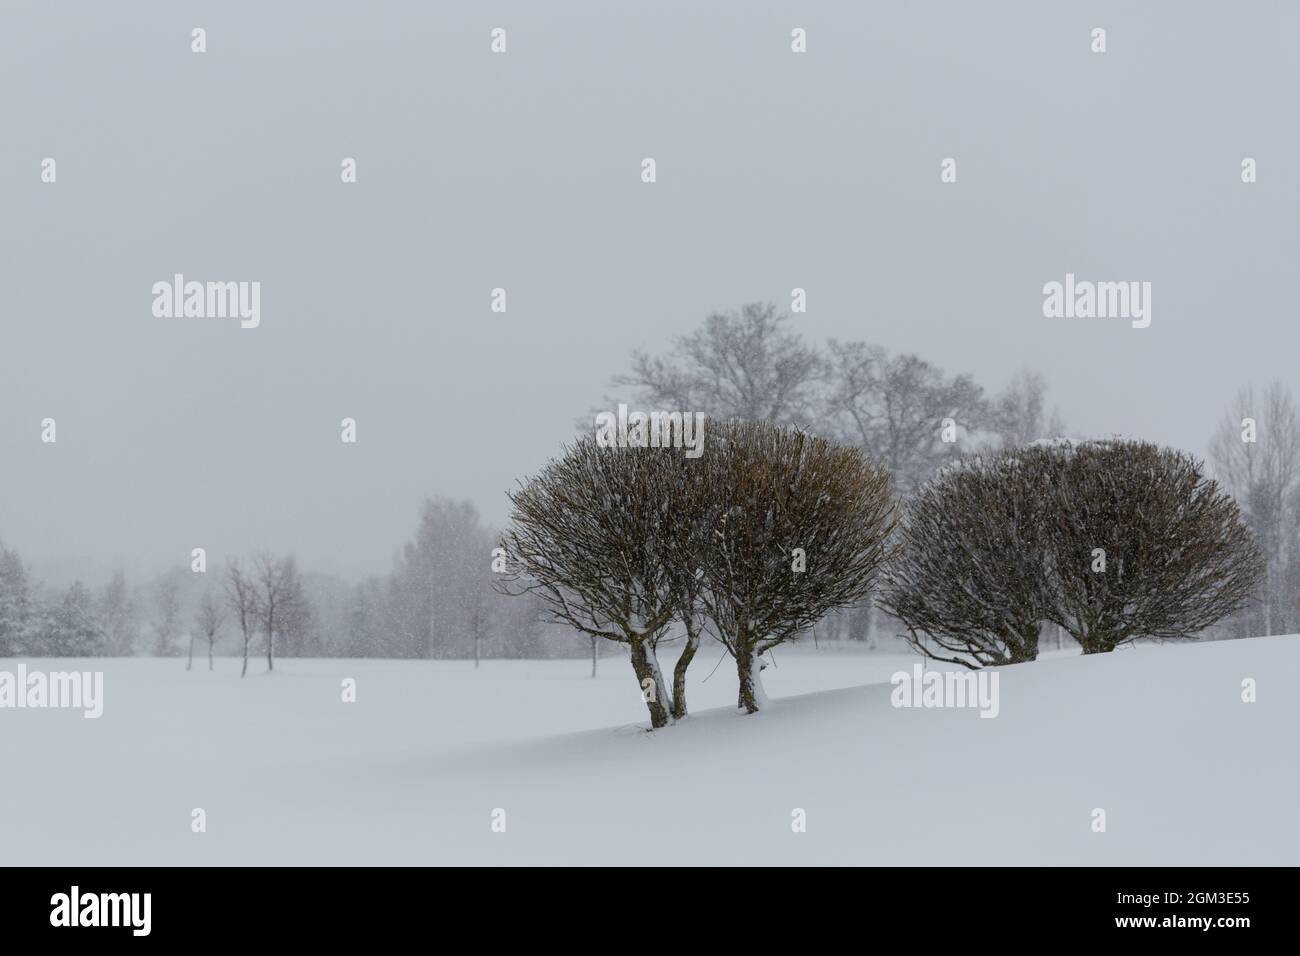 A couple of bushes in a snowy landscape in Sweden Stock Photo